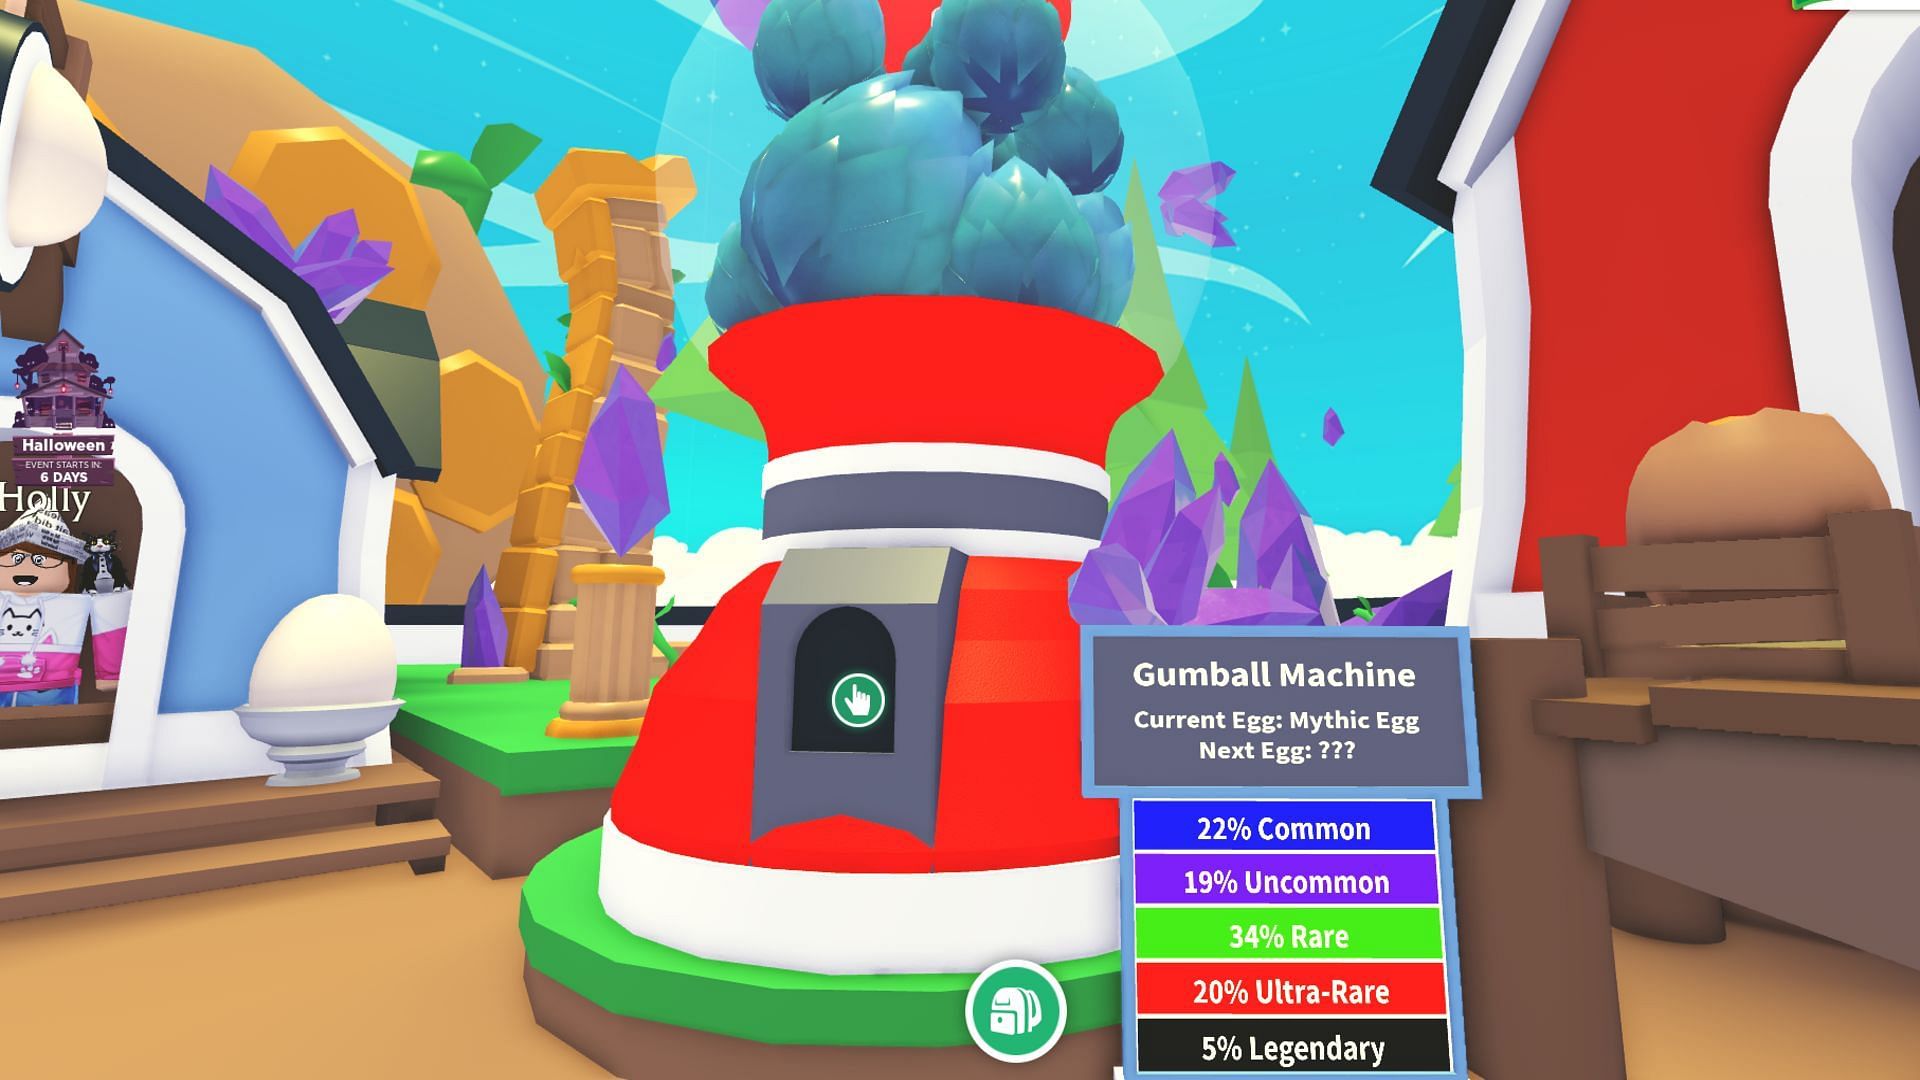 Mythic Eggs cost 750 Bucks, a small price to pay. (Image via Roblox)